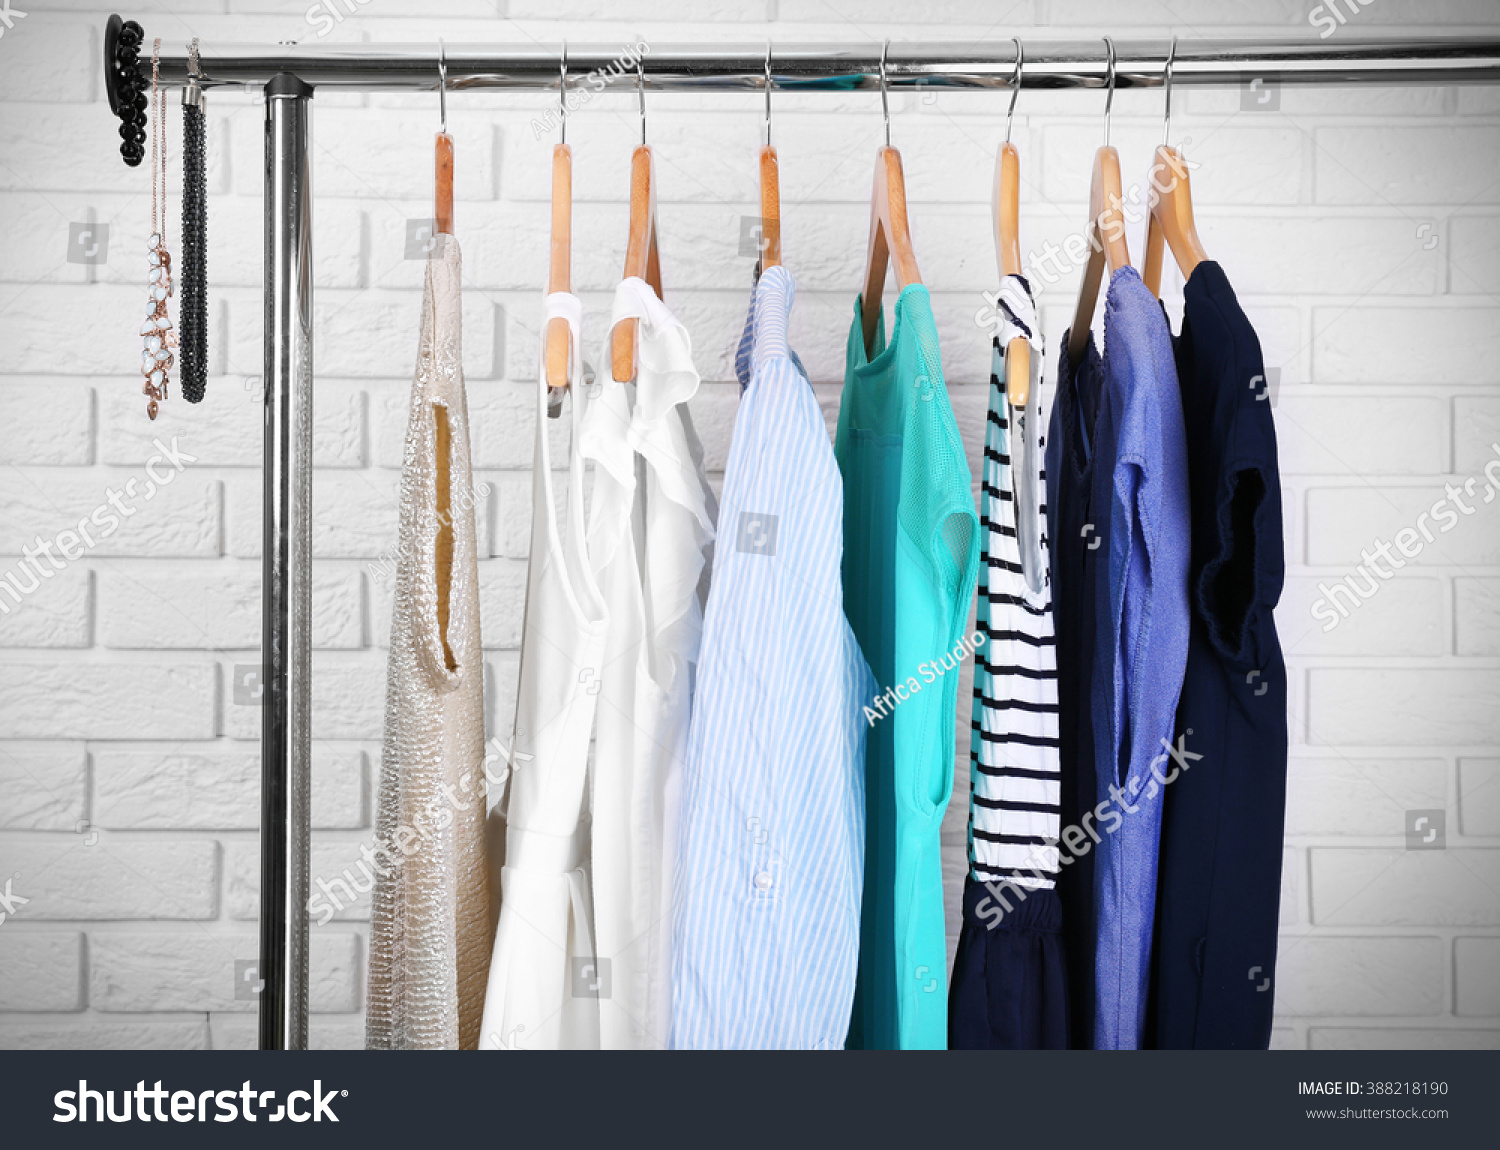 Collection of female clothes hanging on a rack #388218190